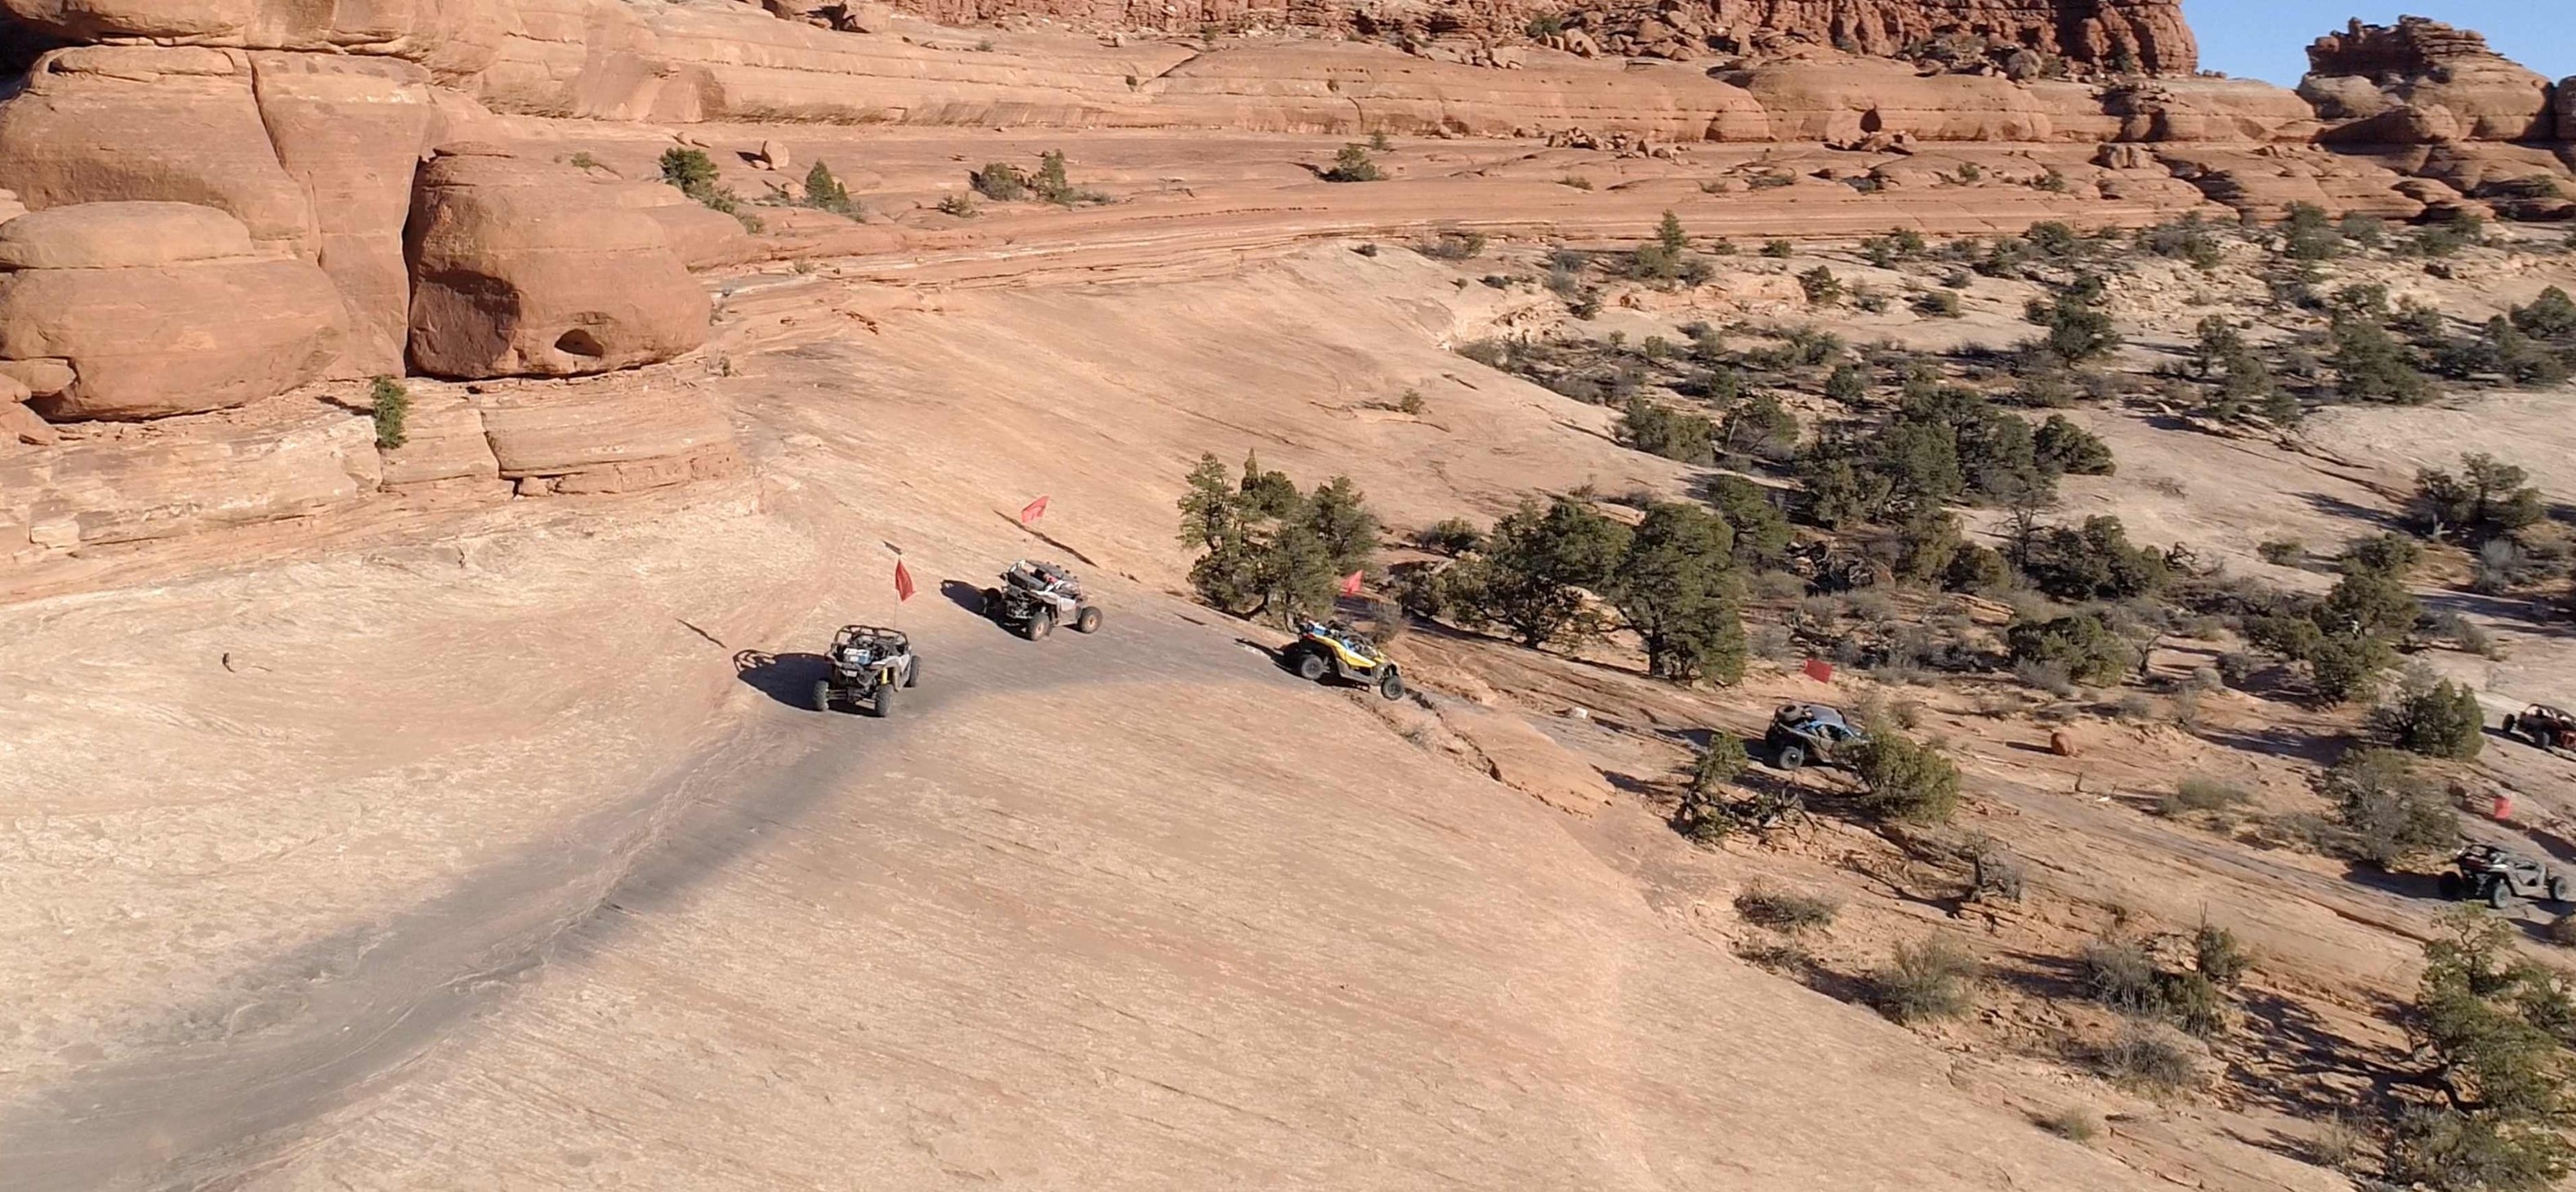 Maverick X3 riding in desert with canyons